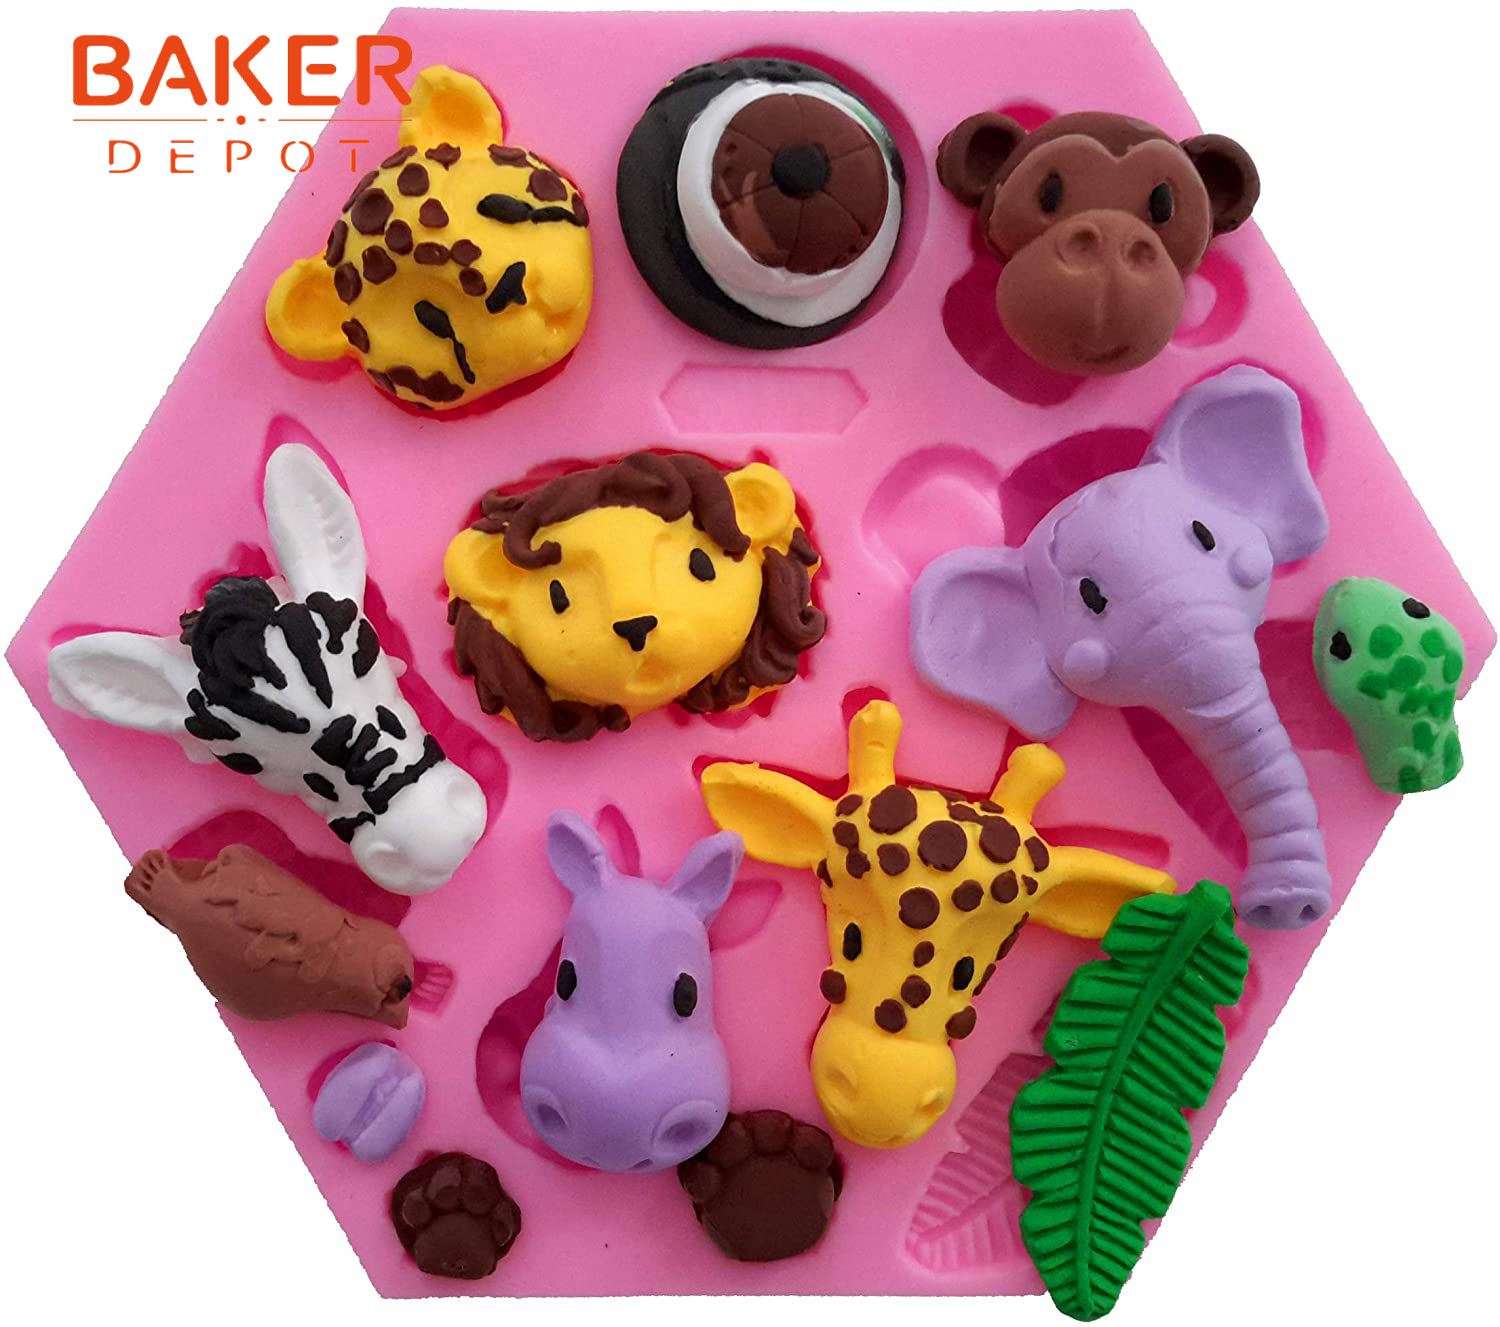 Forest Animals Fondant Cake Decorating Molds Zoo Animals Silicone Mold for  Chocolate Candy Gum Paste Clay Sugar Craft Cupcake Topper Supplies  (Elephant Lion Giraffe Monkey Zebra Hippo)